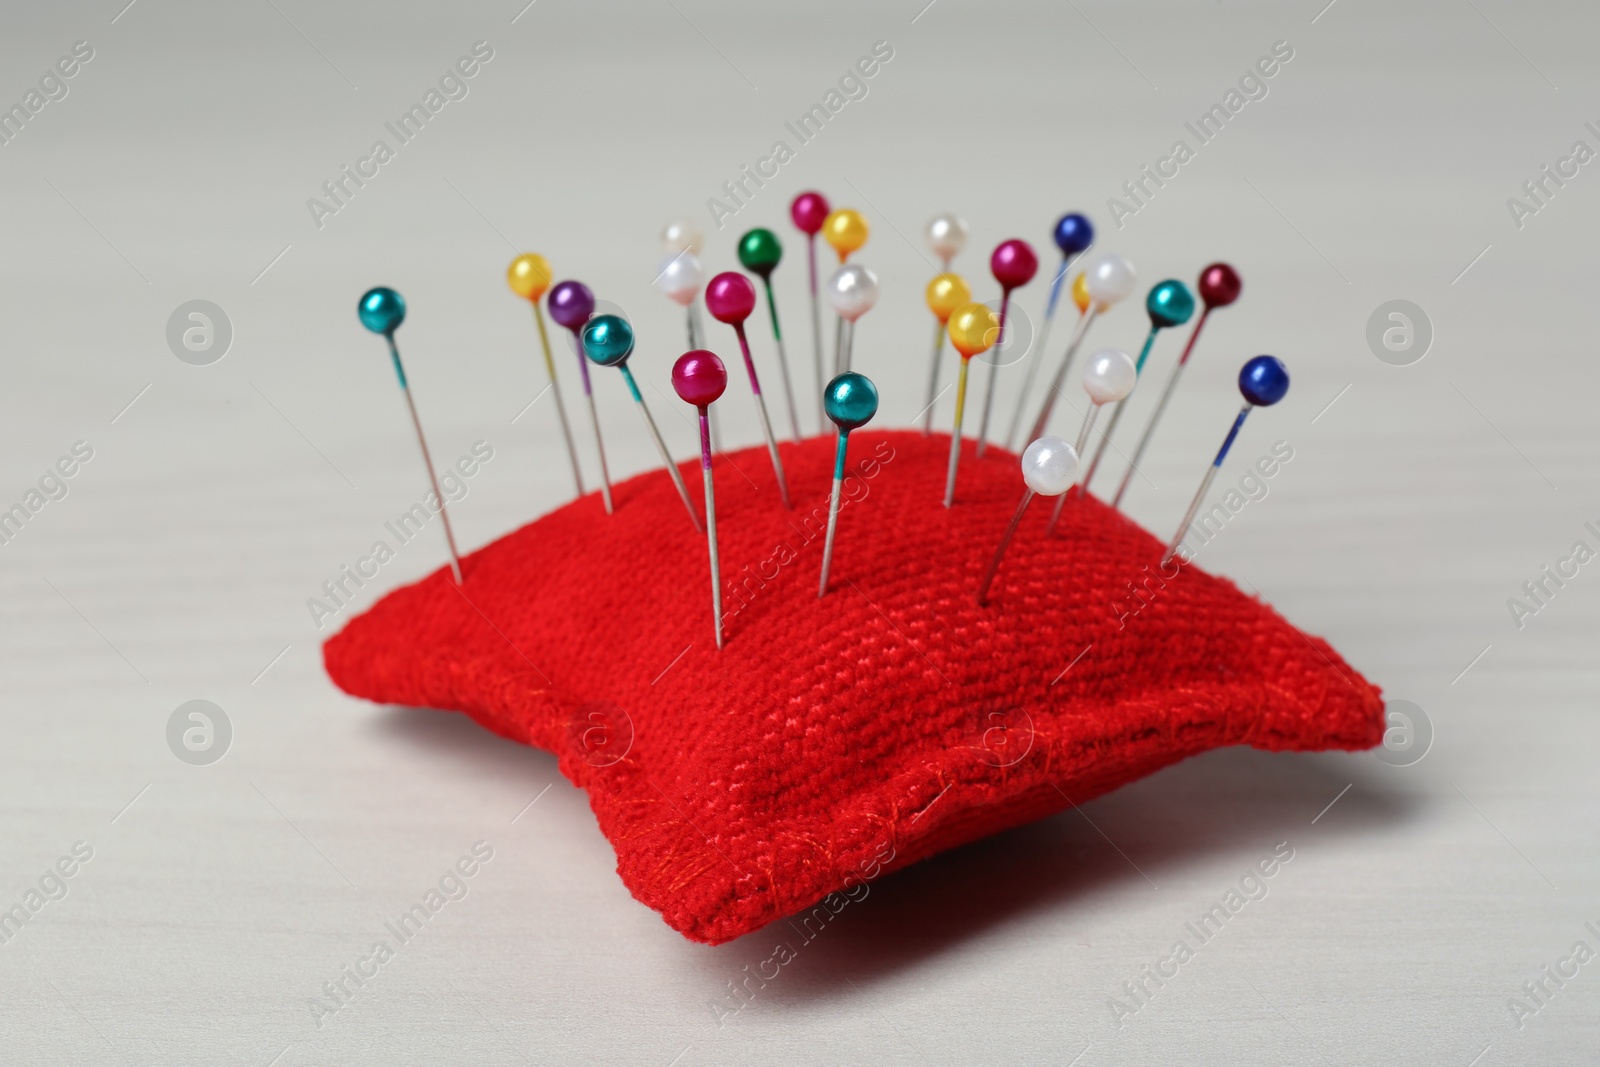 Photo of Red cushion with pins on white table